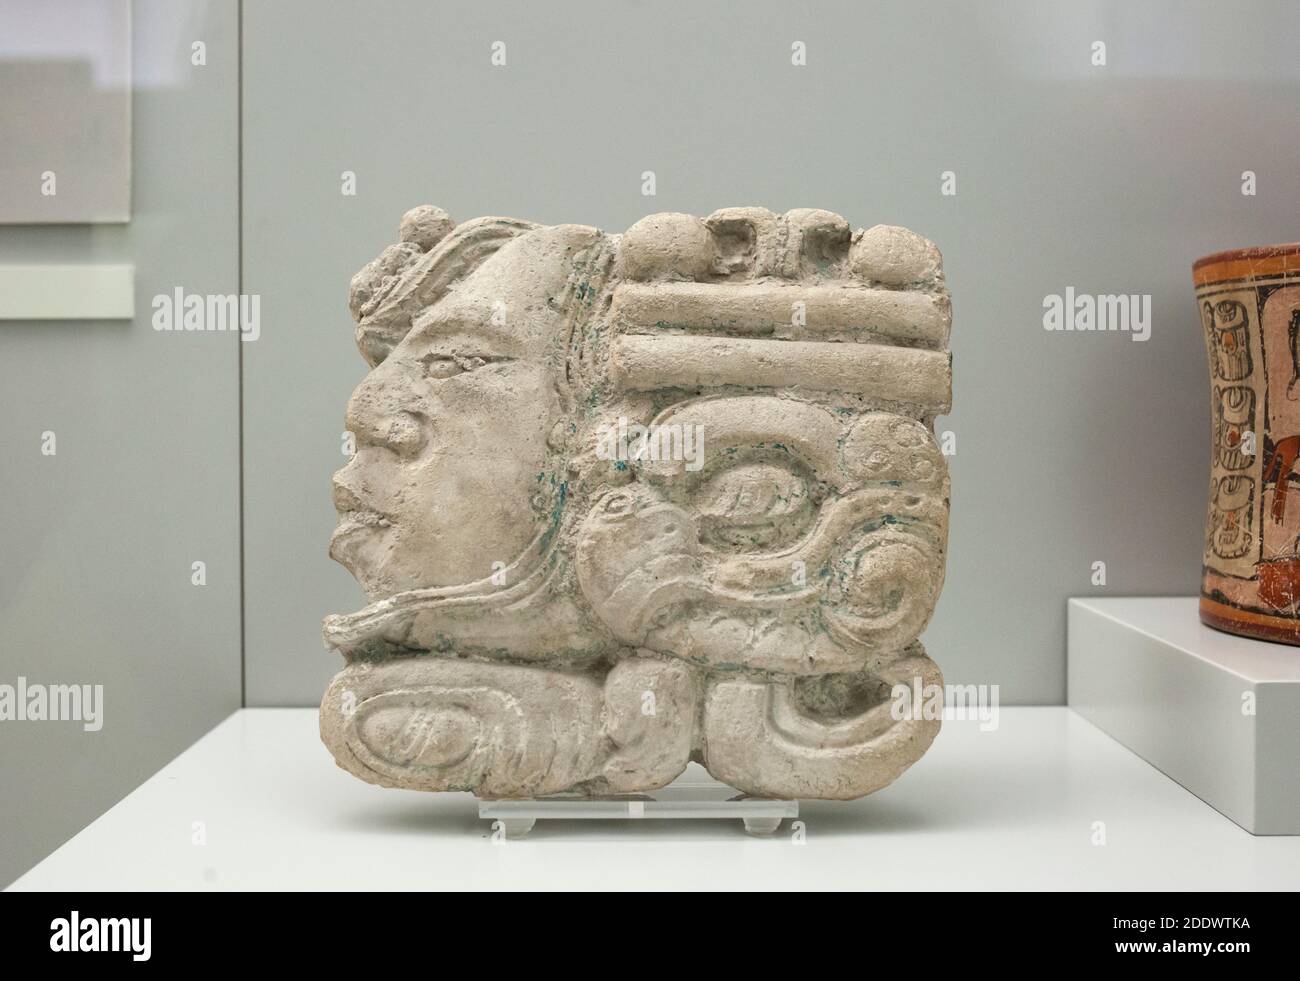 Madrid, Spain - Jul 11th, 2020: Palenque numeric glyph. Mayan culture, 600 AD. Museum of the Americas, Madrid, Spain Stock Photo